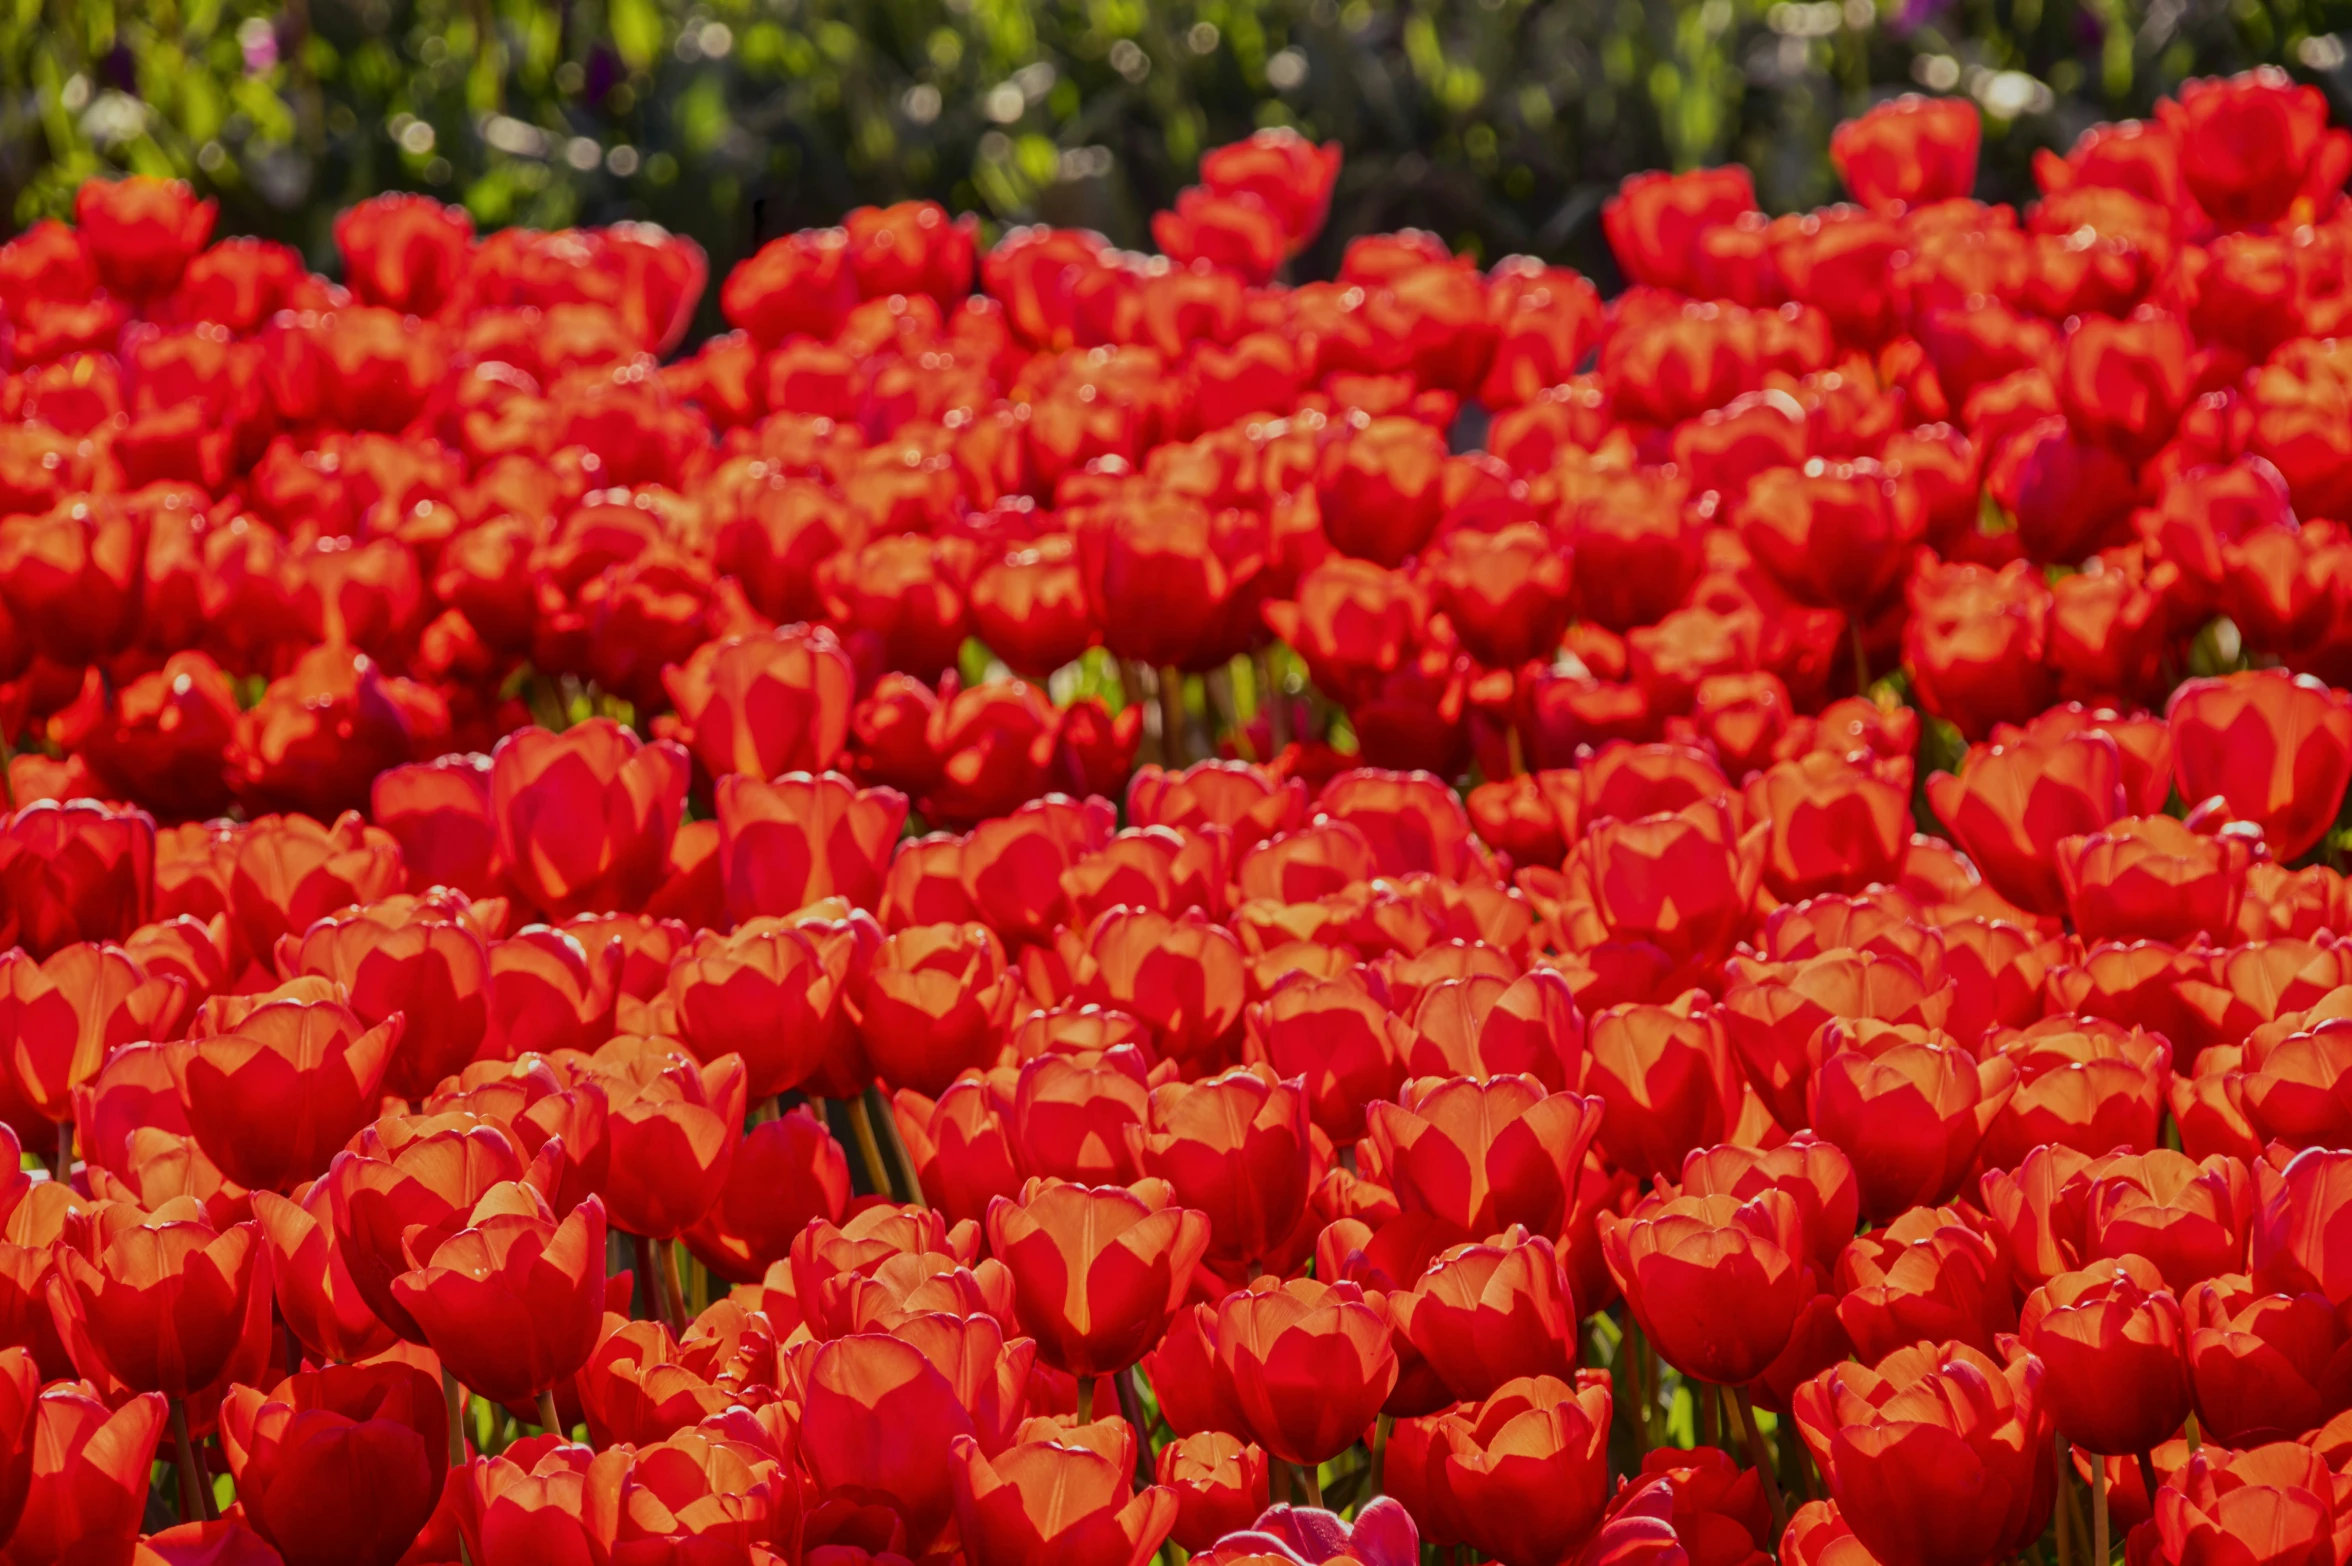 a field of red tulips is seen in this picture